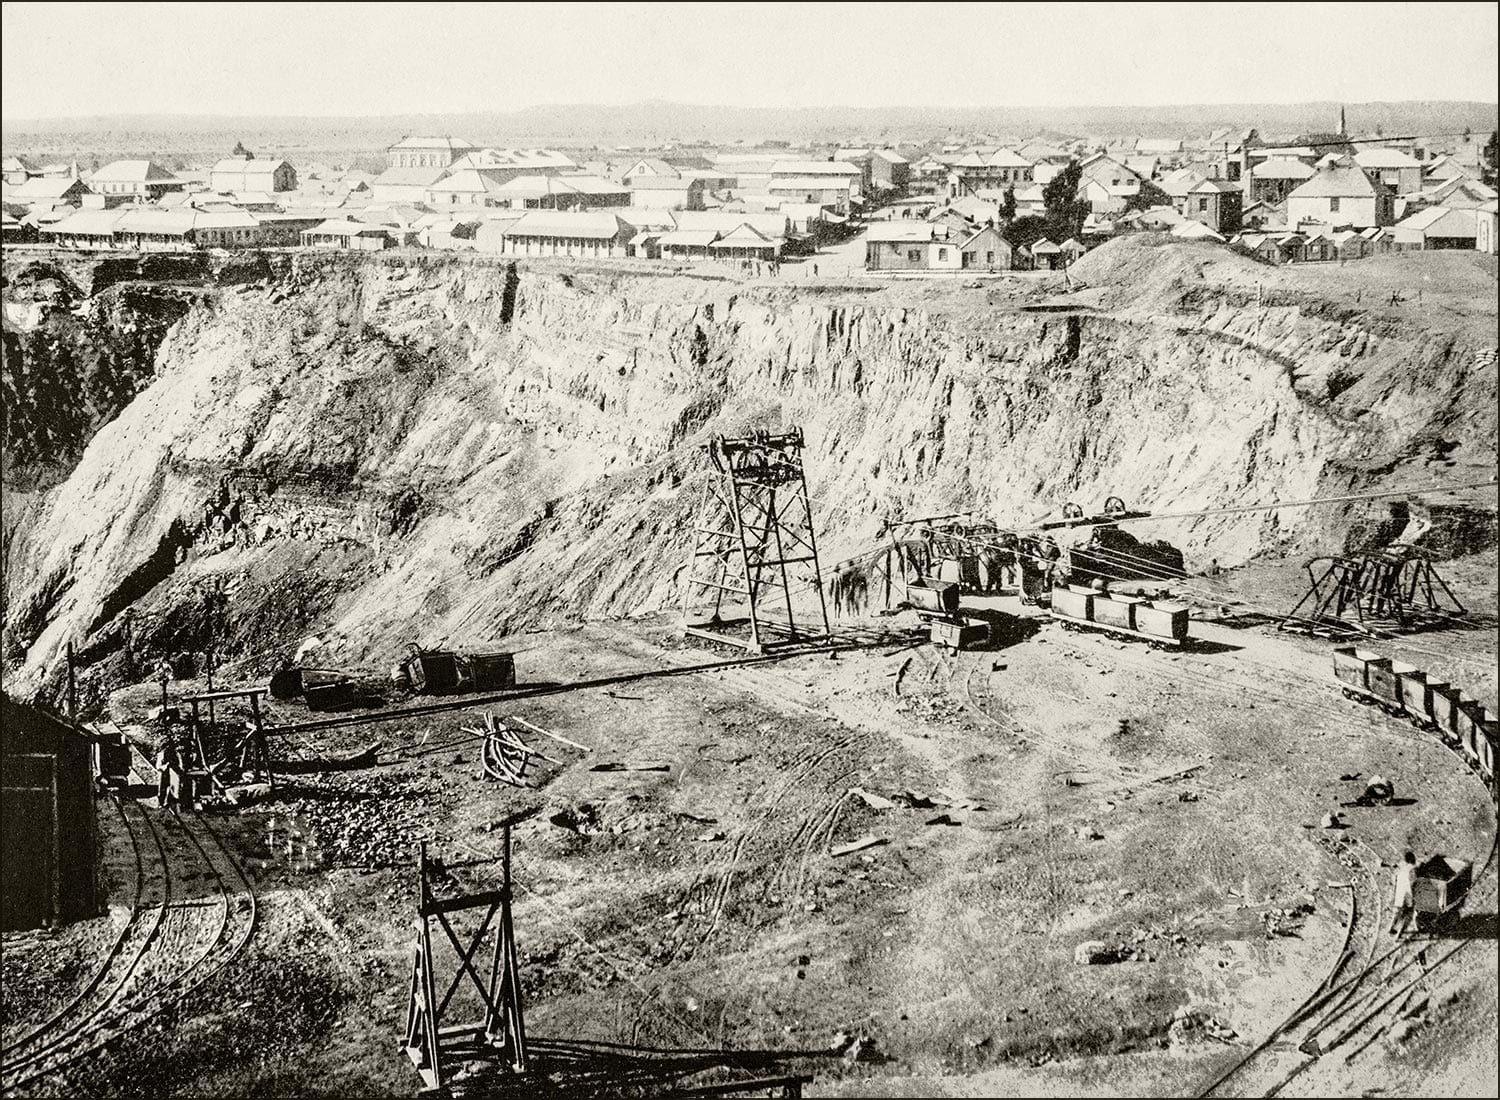 The history of diamonds: Diamond mine in South Africa in 1920